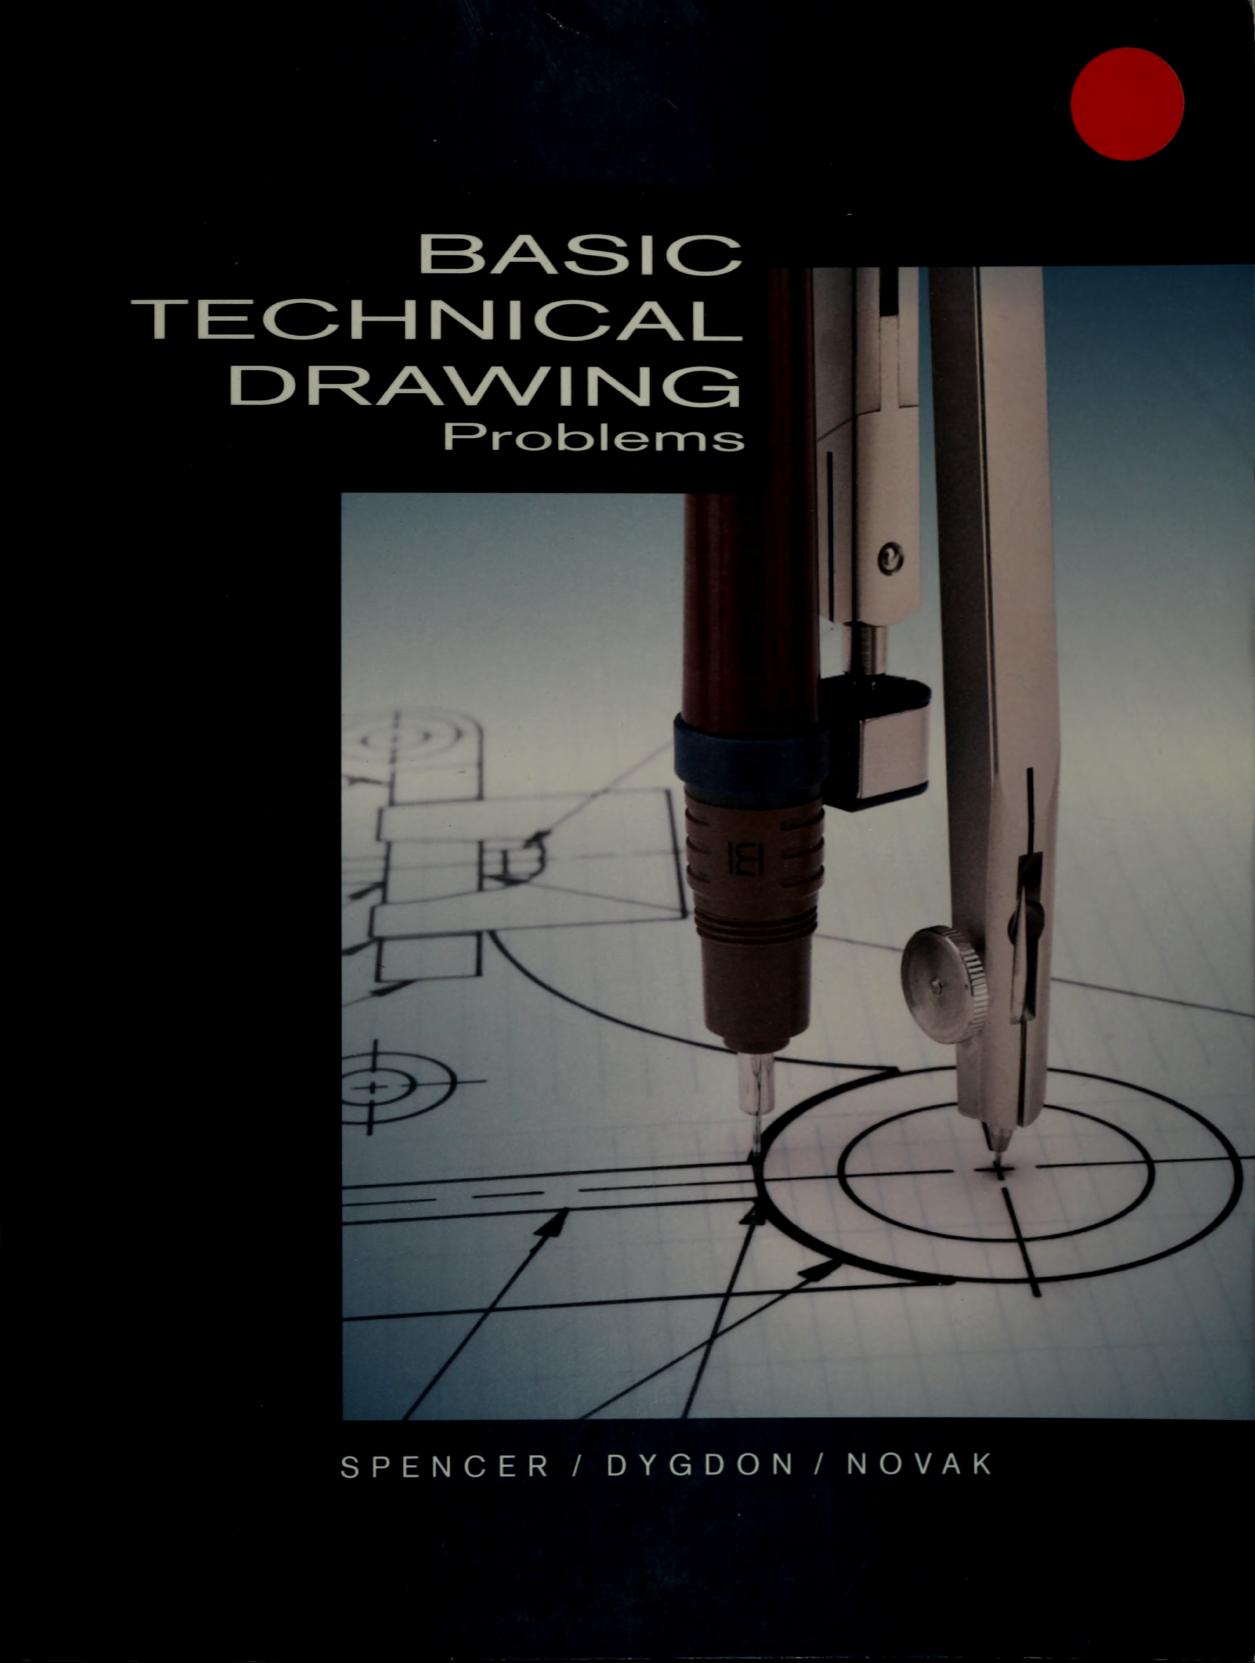 Basic technical drawing problems